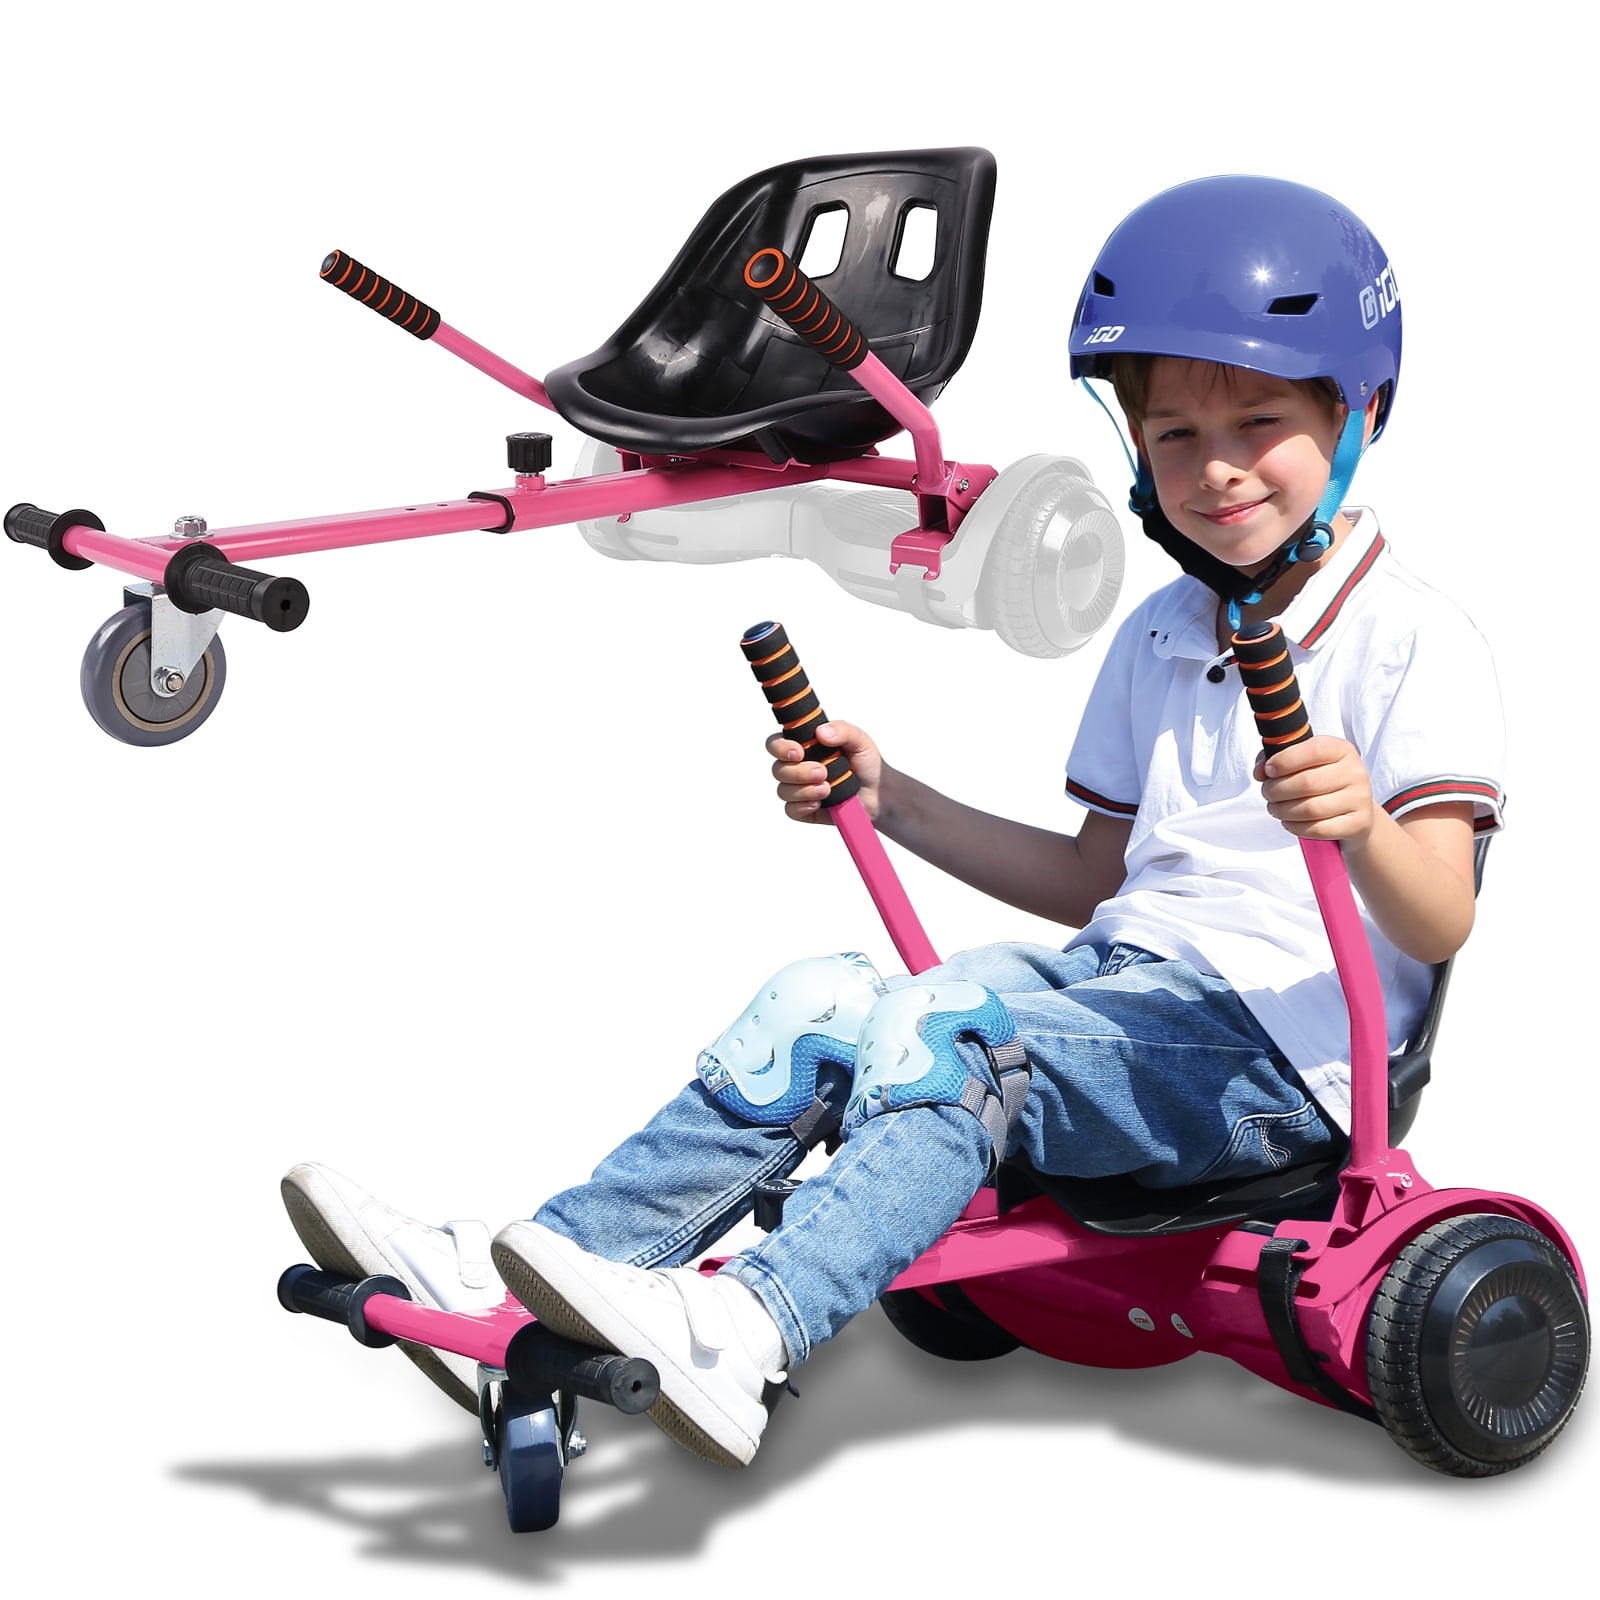 2022 Whole Sale Hoverkart for Hoverboard Go Kart Seat for Kids self balance  hoverboard hoverkart go karts - AliExpress